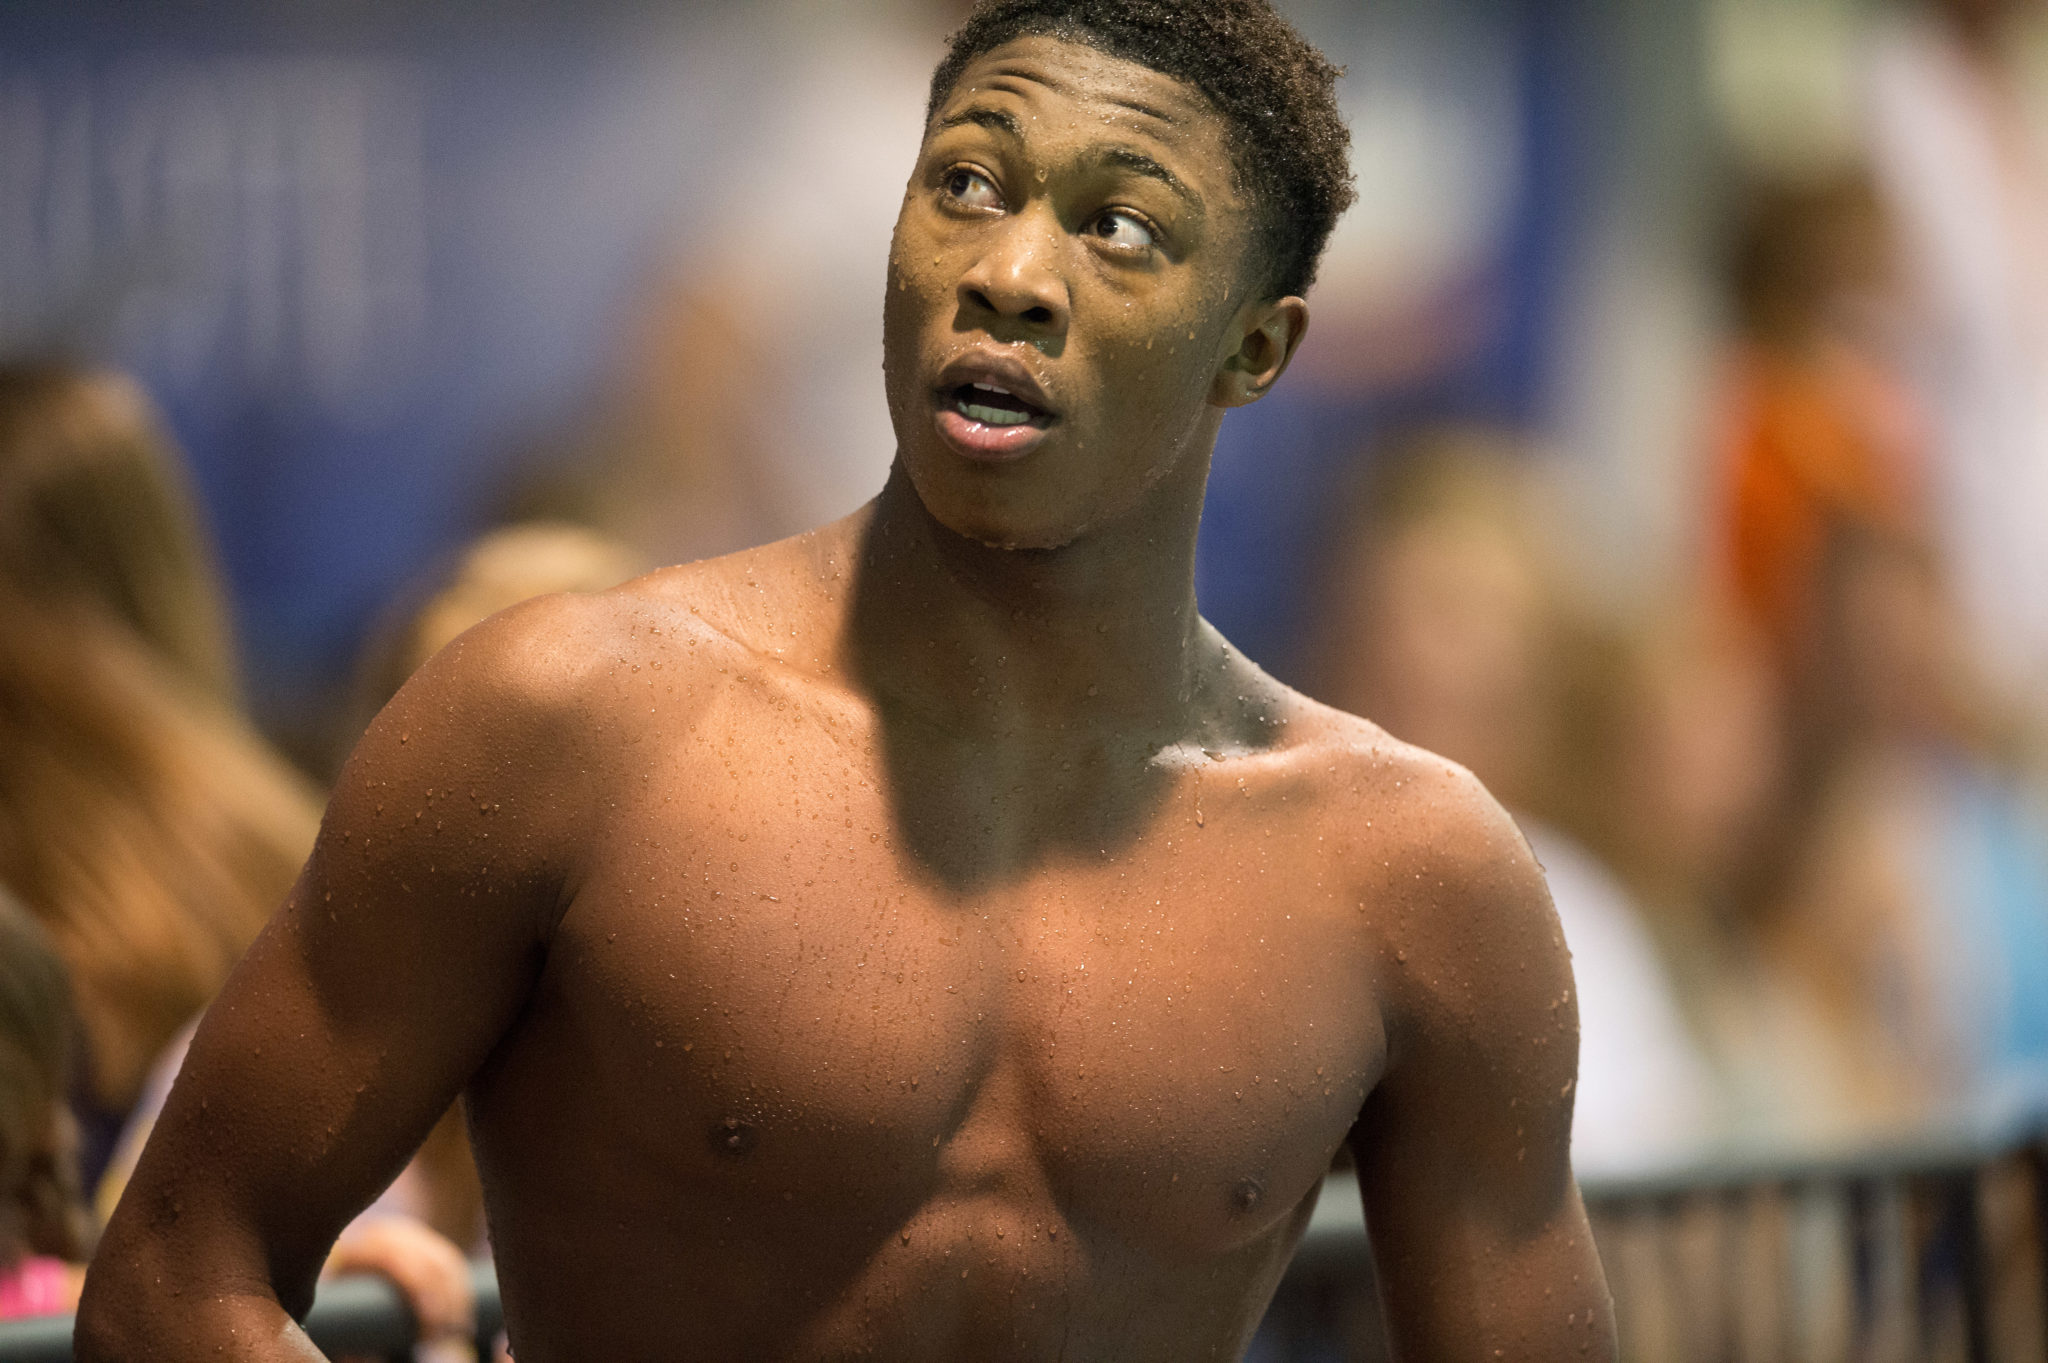 Reece Whitley, the future of U.S. swimming, is 6 feet 9, 17 years old and  African-American